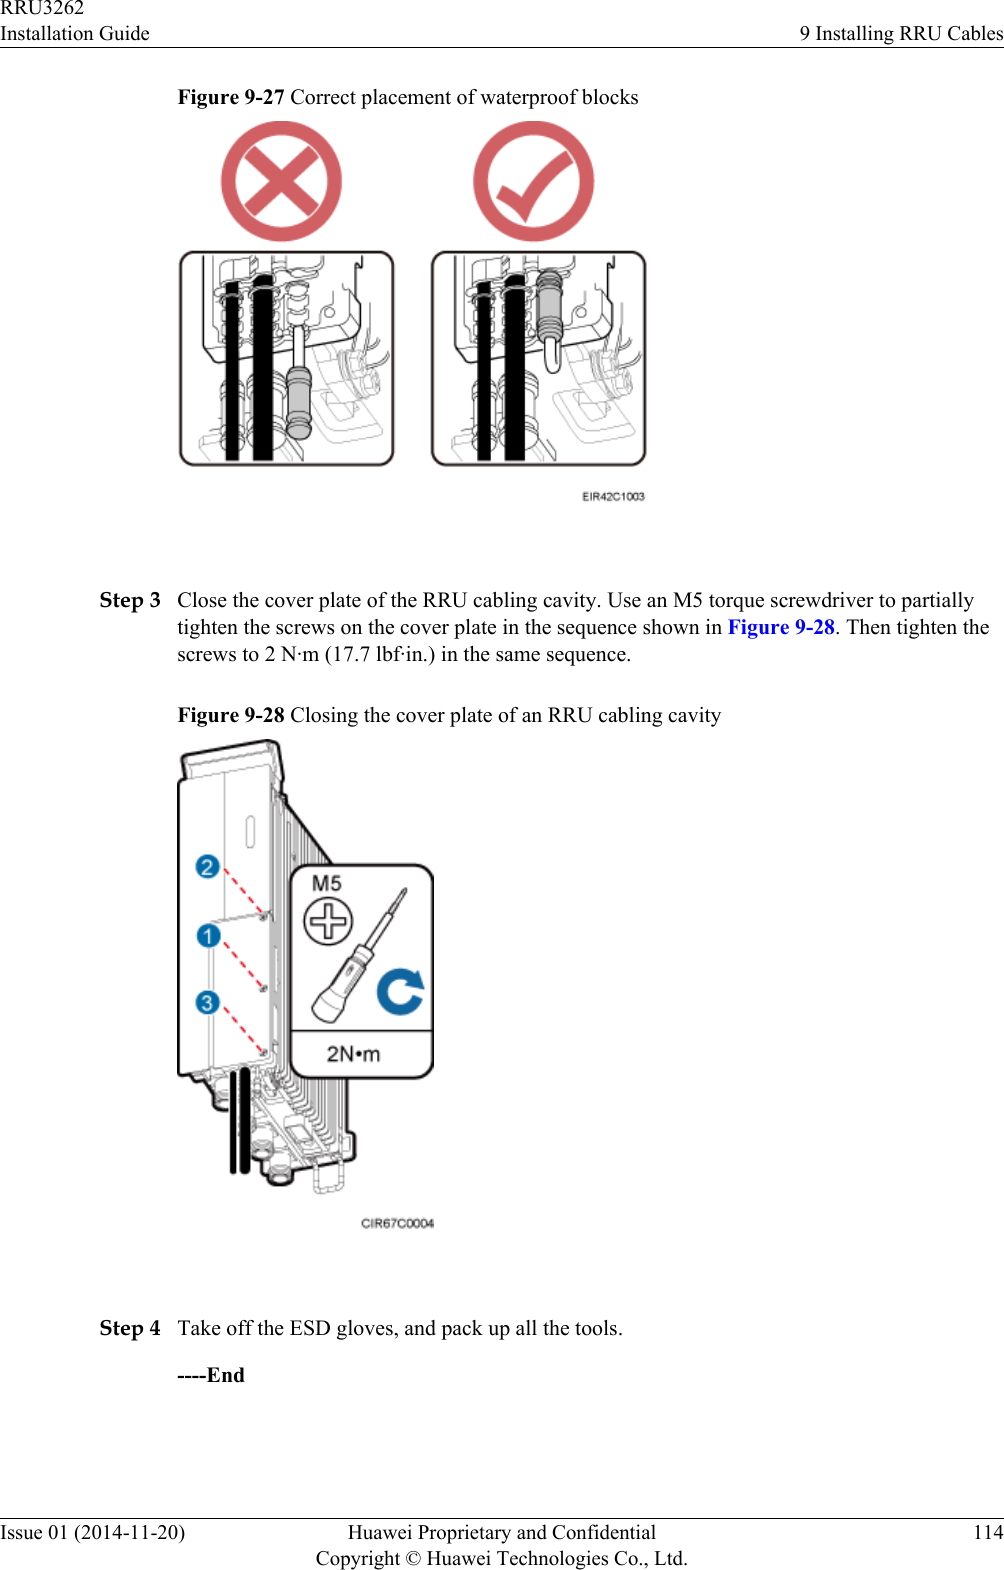 Figure 9-27 Correct placement of waterproof blocks Step 3 Close the cover plate of the RRU cabling cavity. Use an M5 torque screwdriver to partiallytighten the screws on the cover plate in the sequence shown in Figure 9-28. Then tighten thescrews to 2 N·m (17.7 lbf·in.) in the same sequence.Figure 9-28 Closing the cover plate of an RRU cabling cavity Step 4 Take off the ESD gloves, and pack up all the tools.----EndRRU3262Installation Guide 9 Installing RRU CablesIssue 01 (2014-11-20) Huawei Proprietary and ConfidentialCopyright © Huawei Technologies Co., Ltd.114